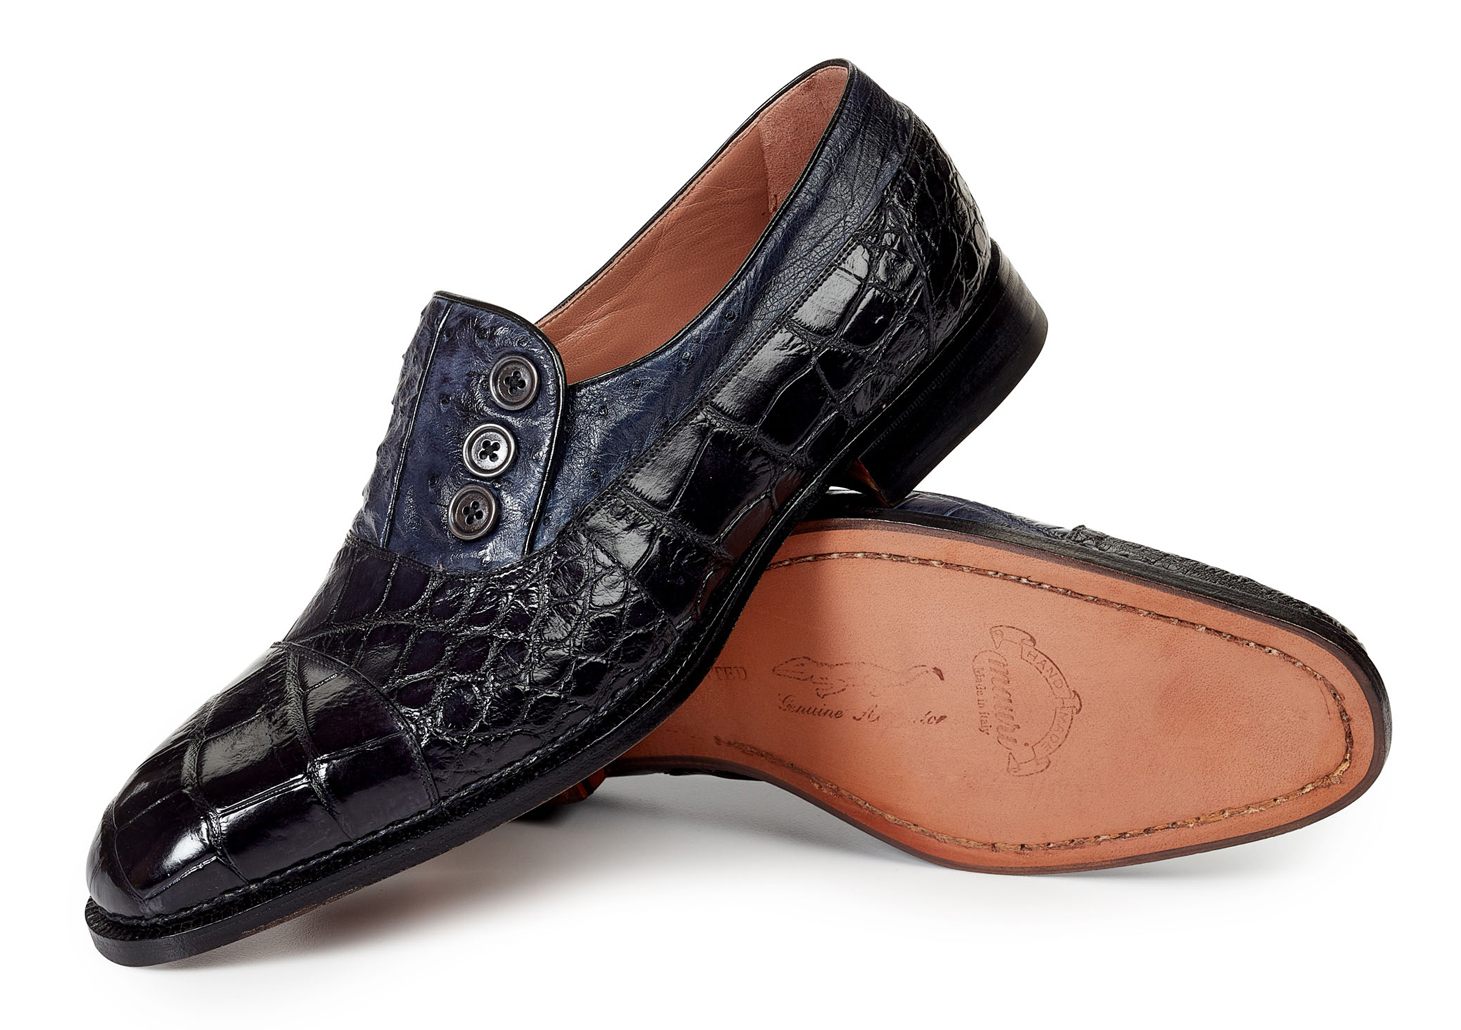 Mauri "Insignia" 1036 Black Genuine Body Alligator / Hand Painted Charcoal Grey Ostrich Shoes